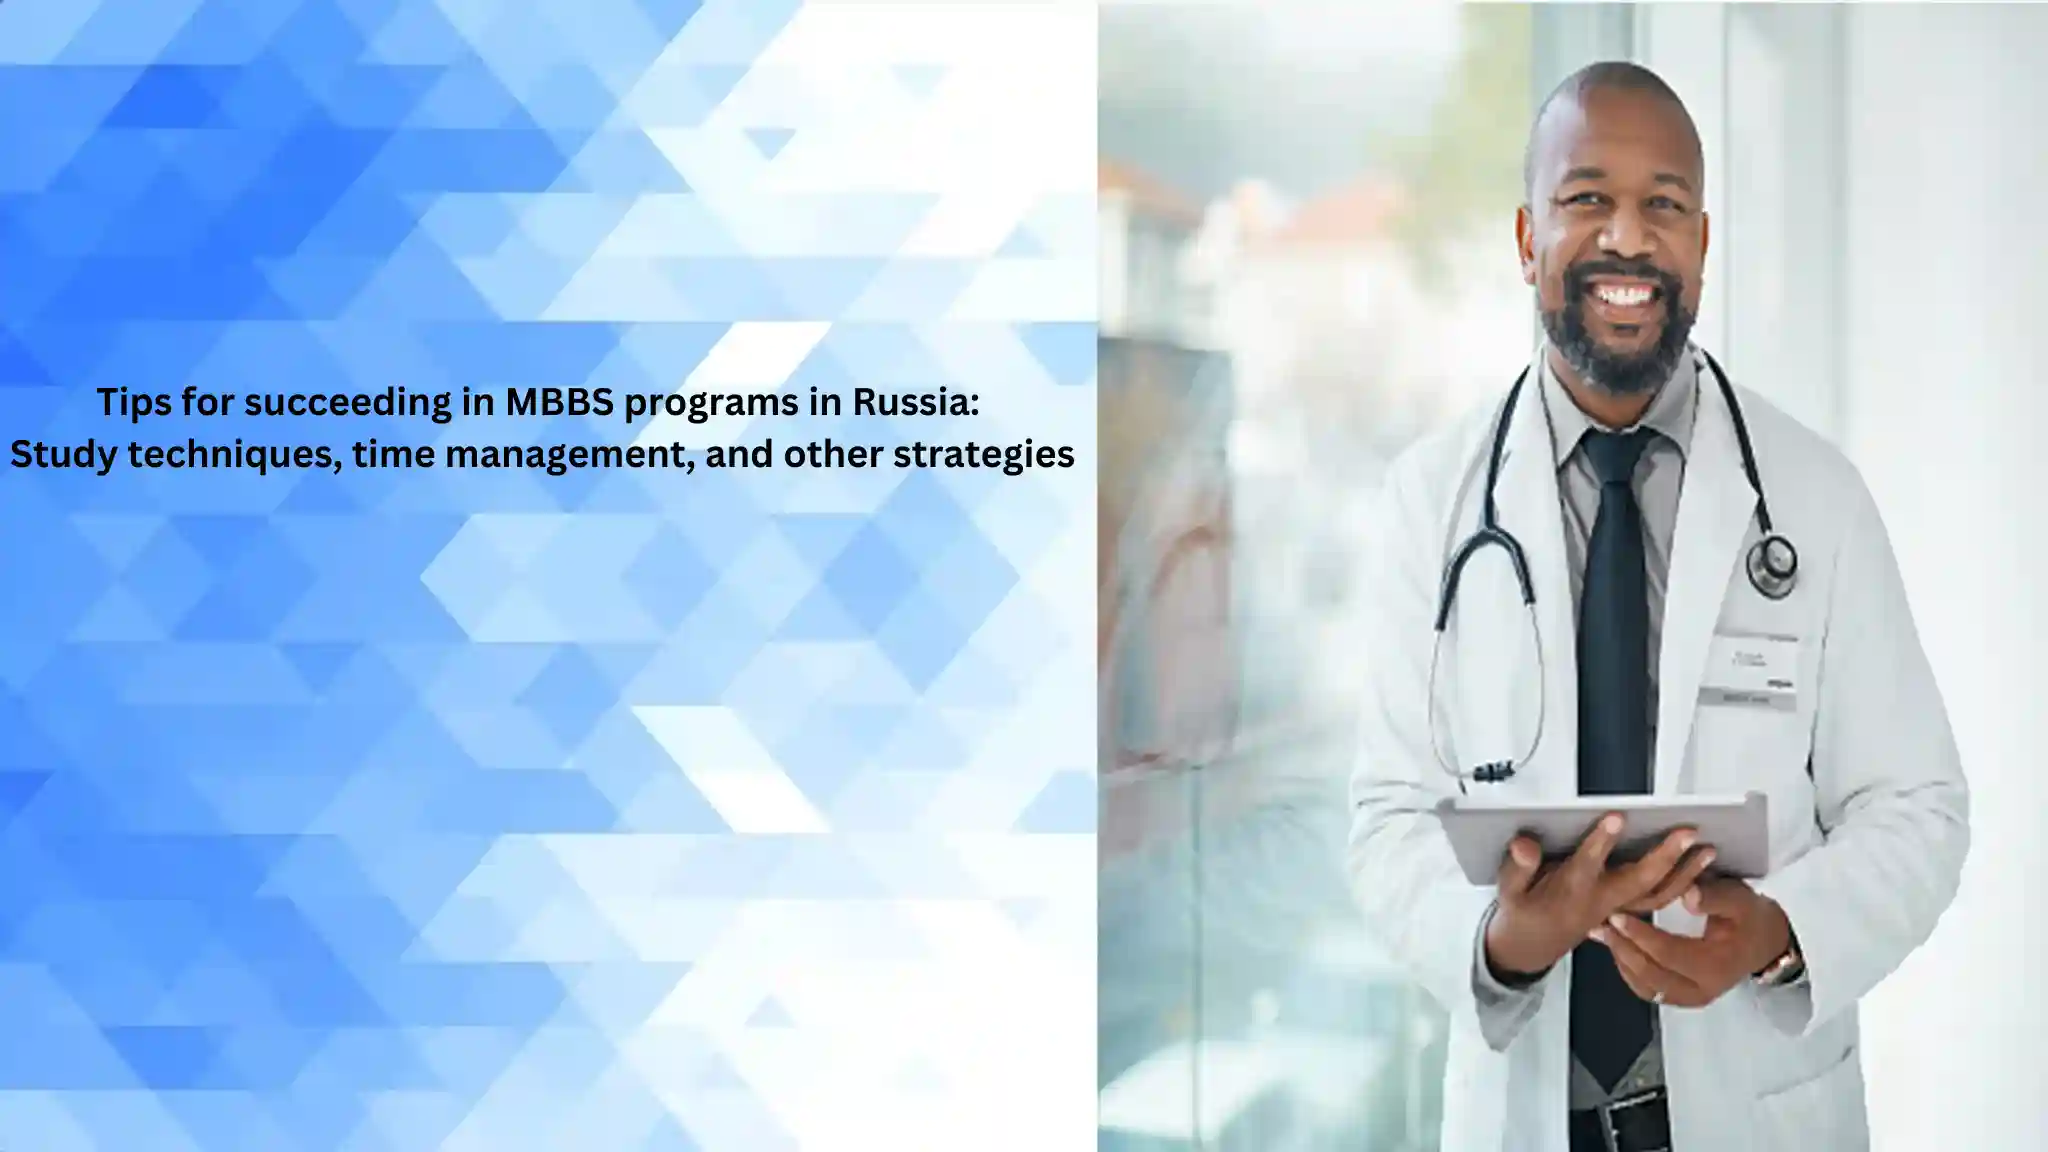 MBBS programs in Russia Study time management strategies